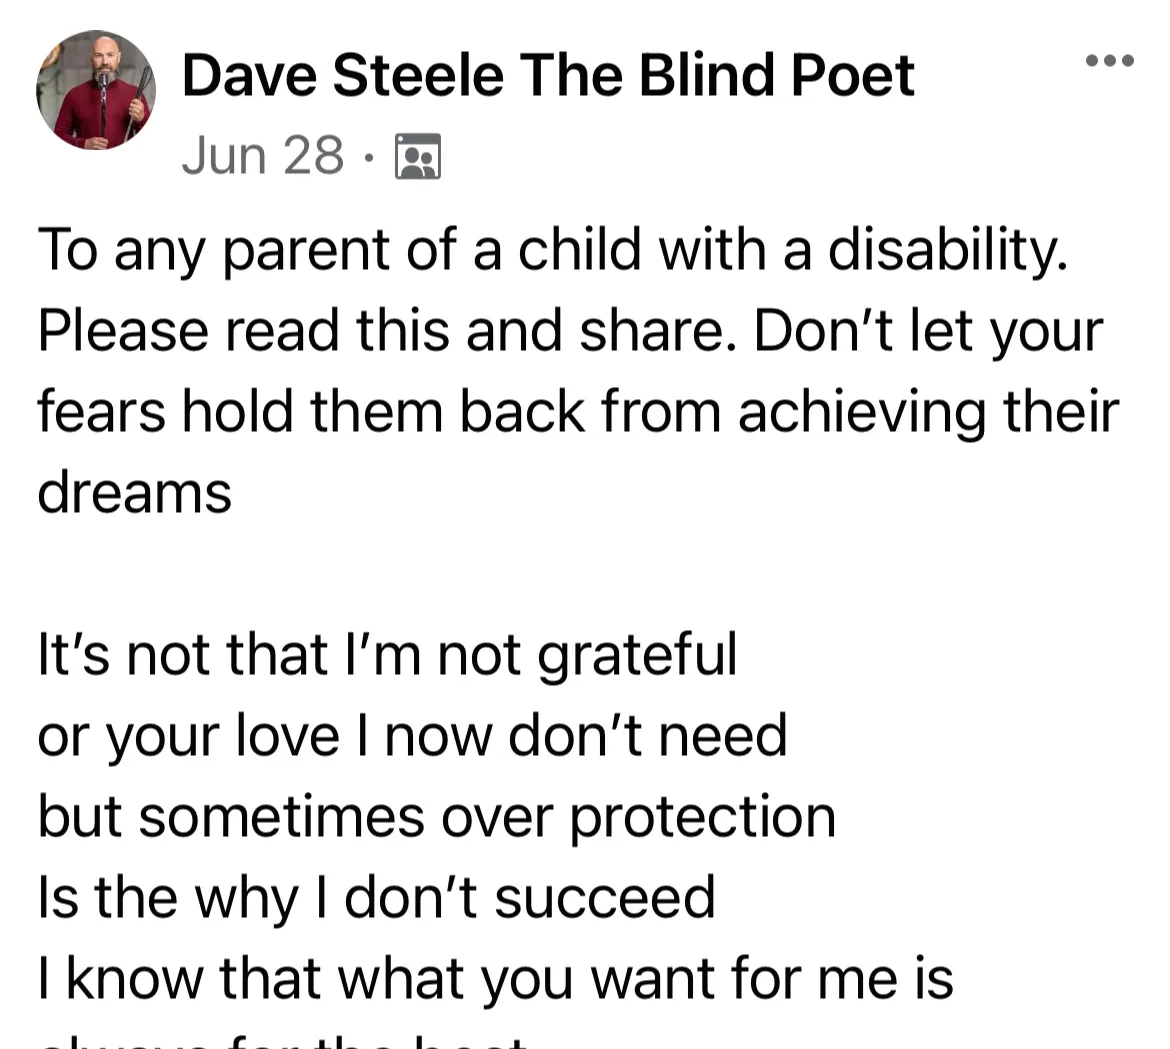 Post from member Dave Steele that reads to any parent of a child with a disability please read this and share. Don't let your fears hold them back from achieving their dreams. It's not that I'm not grateful o your love I now don't need but sometimes over protection is why I don't succeed I know that what you want for me is